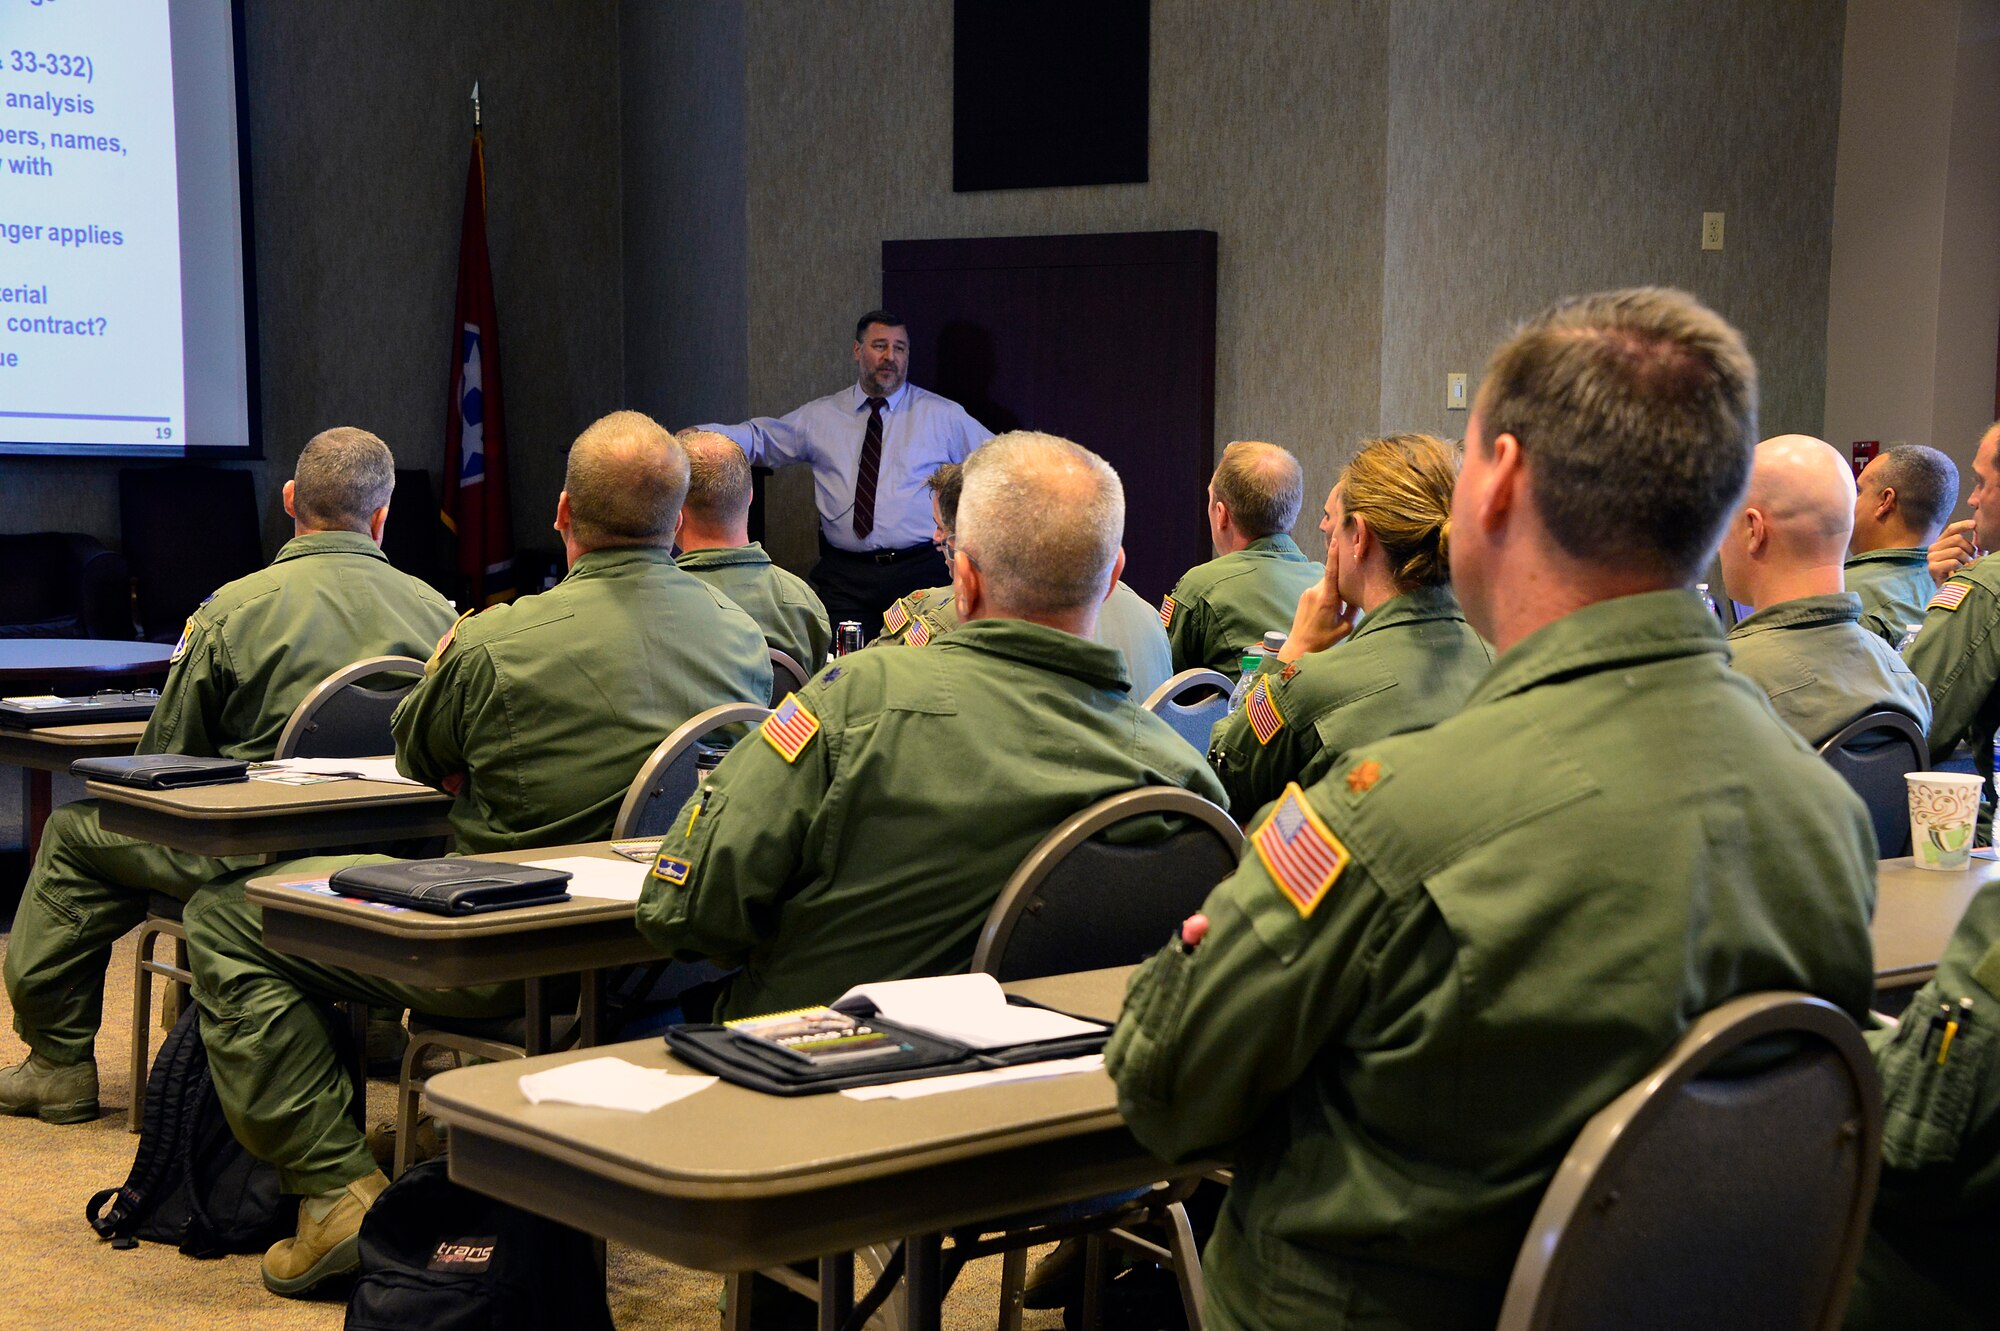 MCGHEE TYSON AIR NATIONAL GUARD BASE, Tenn. - Air National Guard and Air Force Reserve Command officers and safety experts attend a lesson at the I.G. Brown Training and Education Center's campus here August 4, 2015, during the four-day Air Reserve Component Chief of Safety Course. (U.S. Air National Guard photo by Master Sgt. Mike R. Smith/Released)